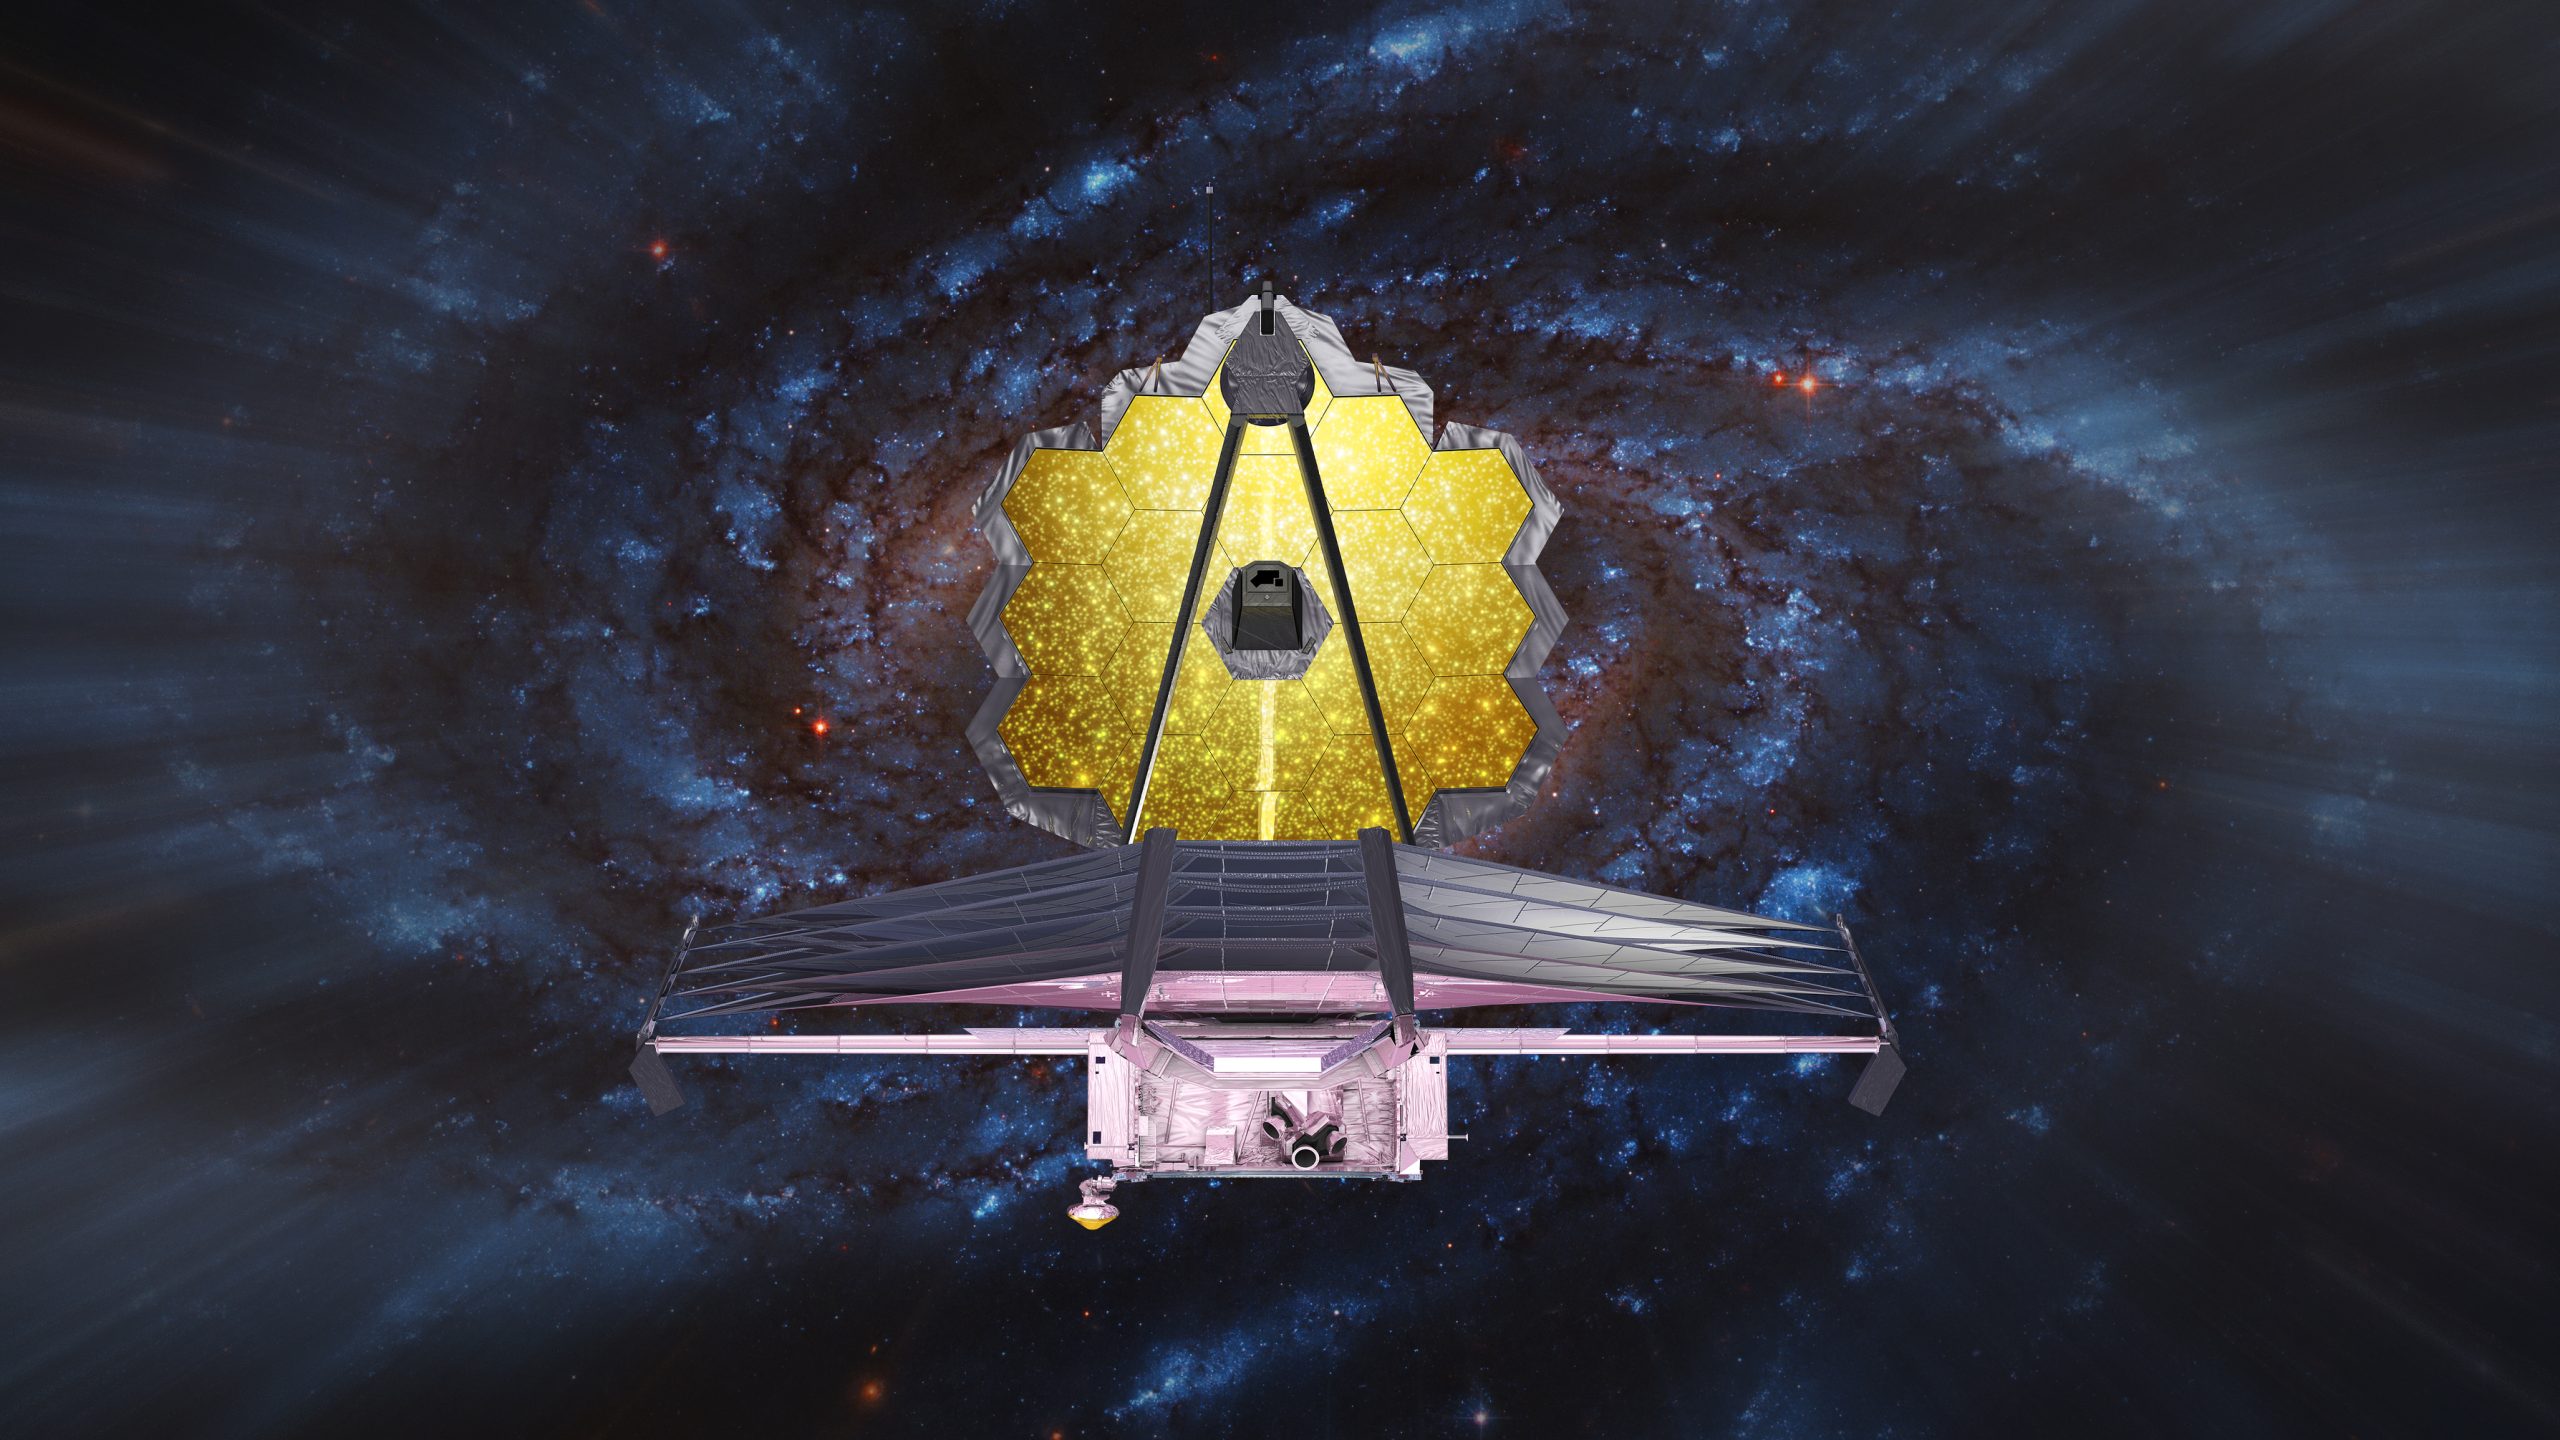 An illustration of the James Webb Space Telescope in deep space. Depositphotos.